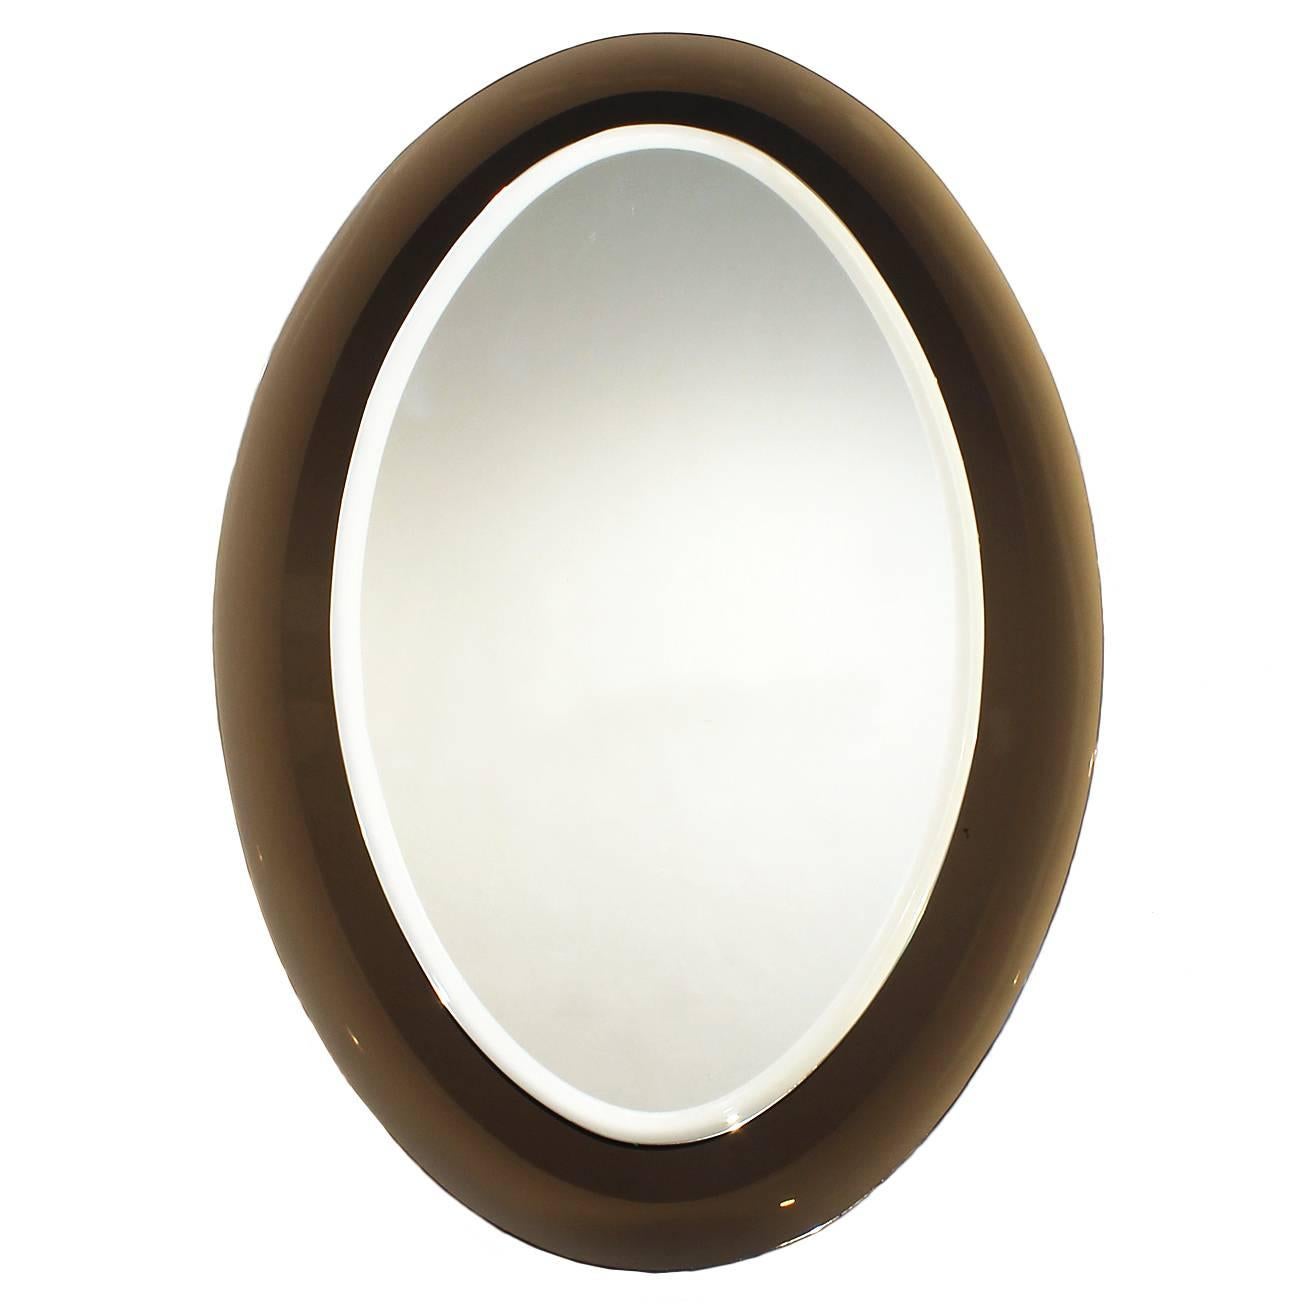 Italian Oval Mirror from the 1960s